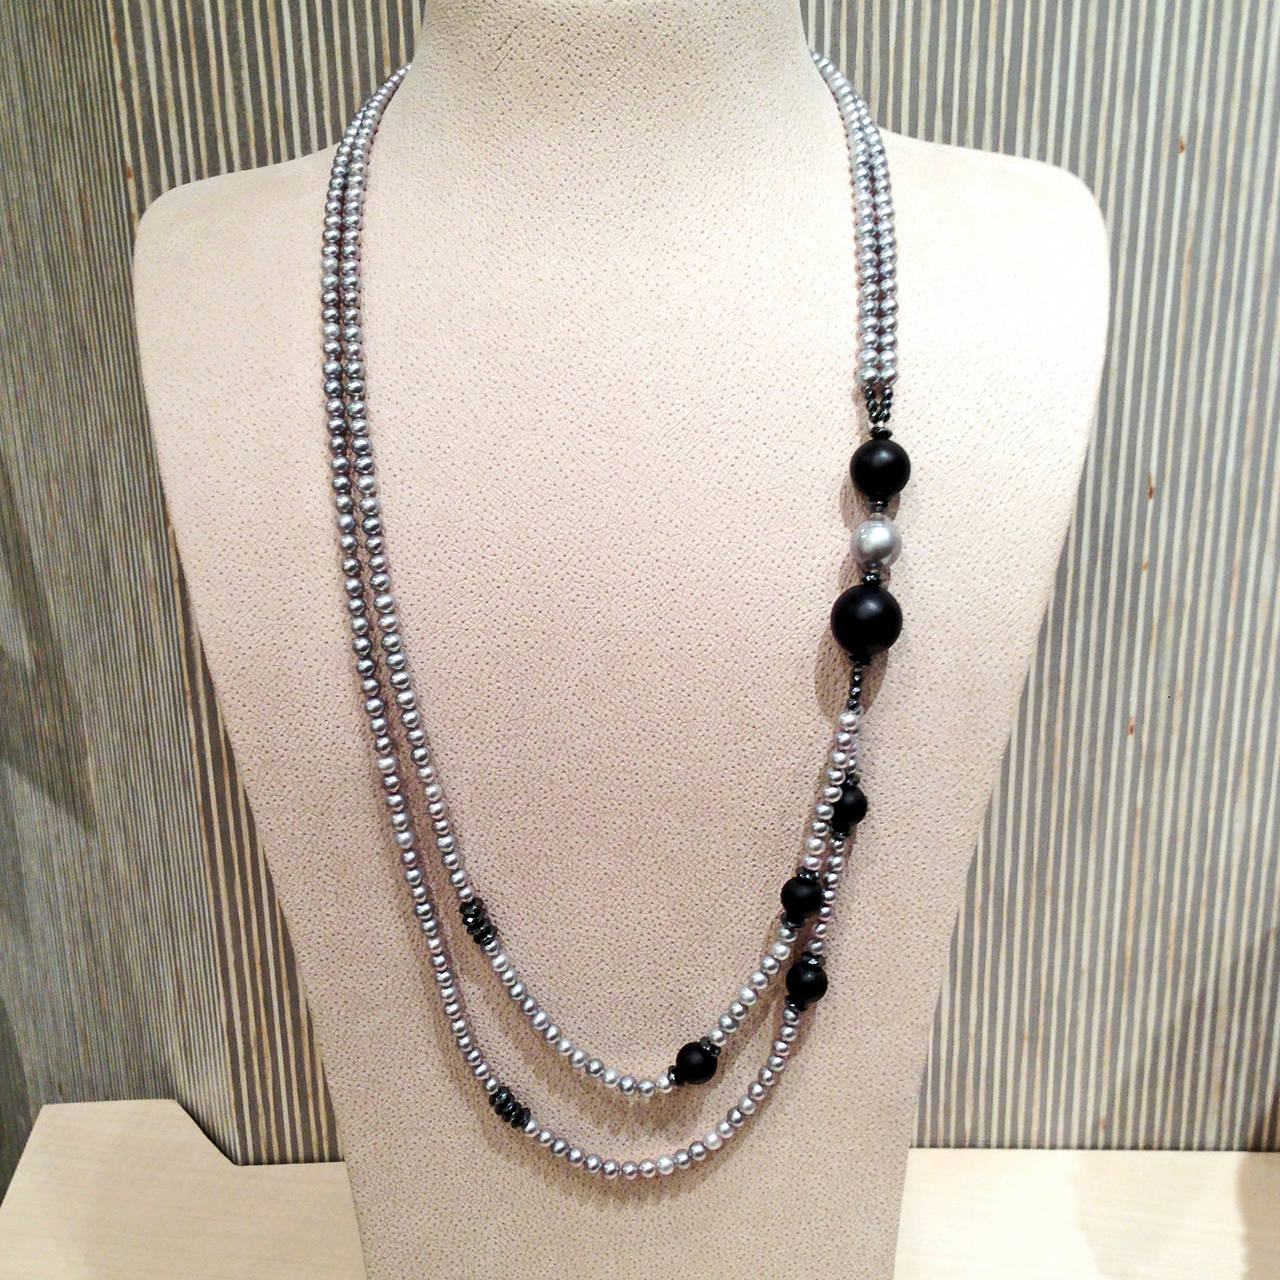 Necklace handstrung with silver pearls, onyx spheres, and black spinel accents and an ornamental clasp.